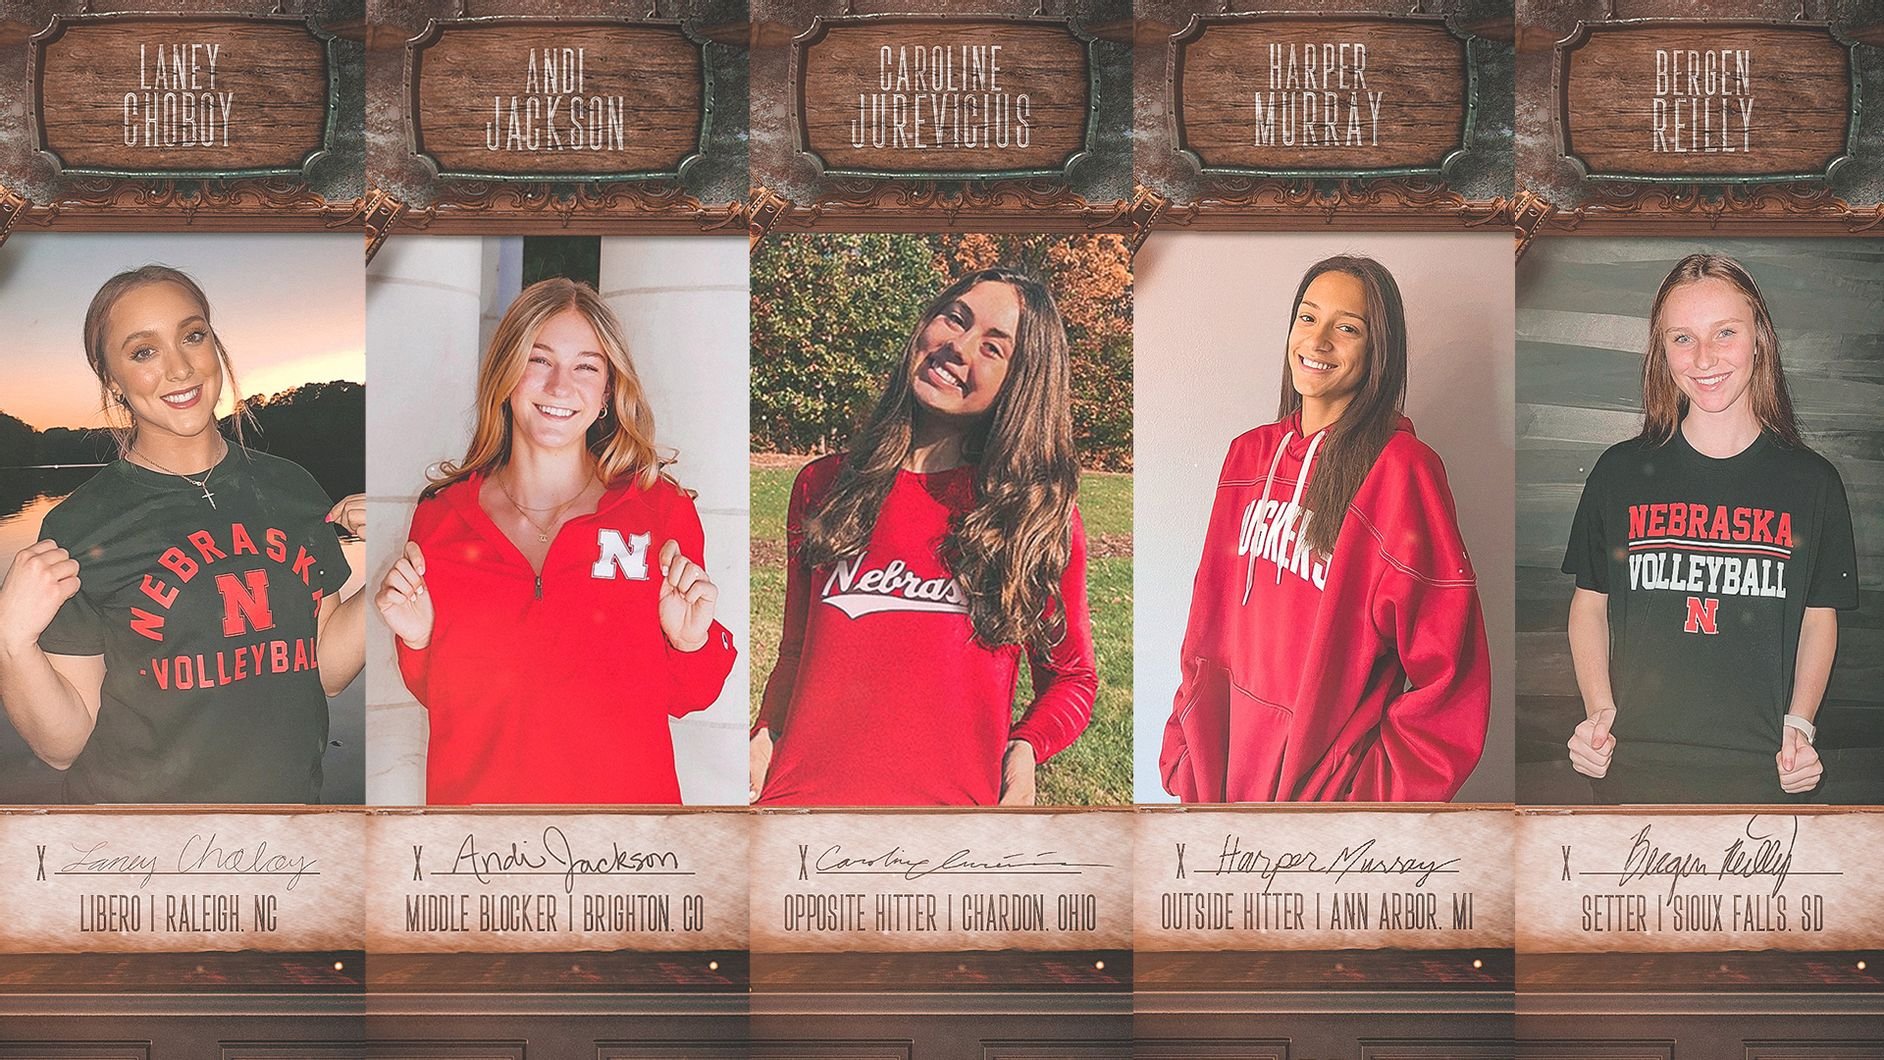 NU Notes: Huskers Sign Top-Ranked Volleyball Class - PANHANDLE